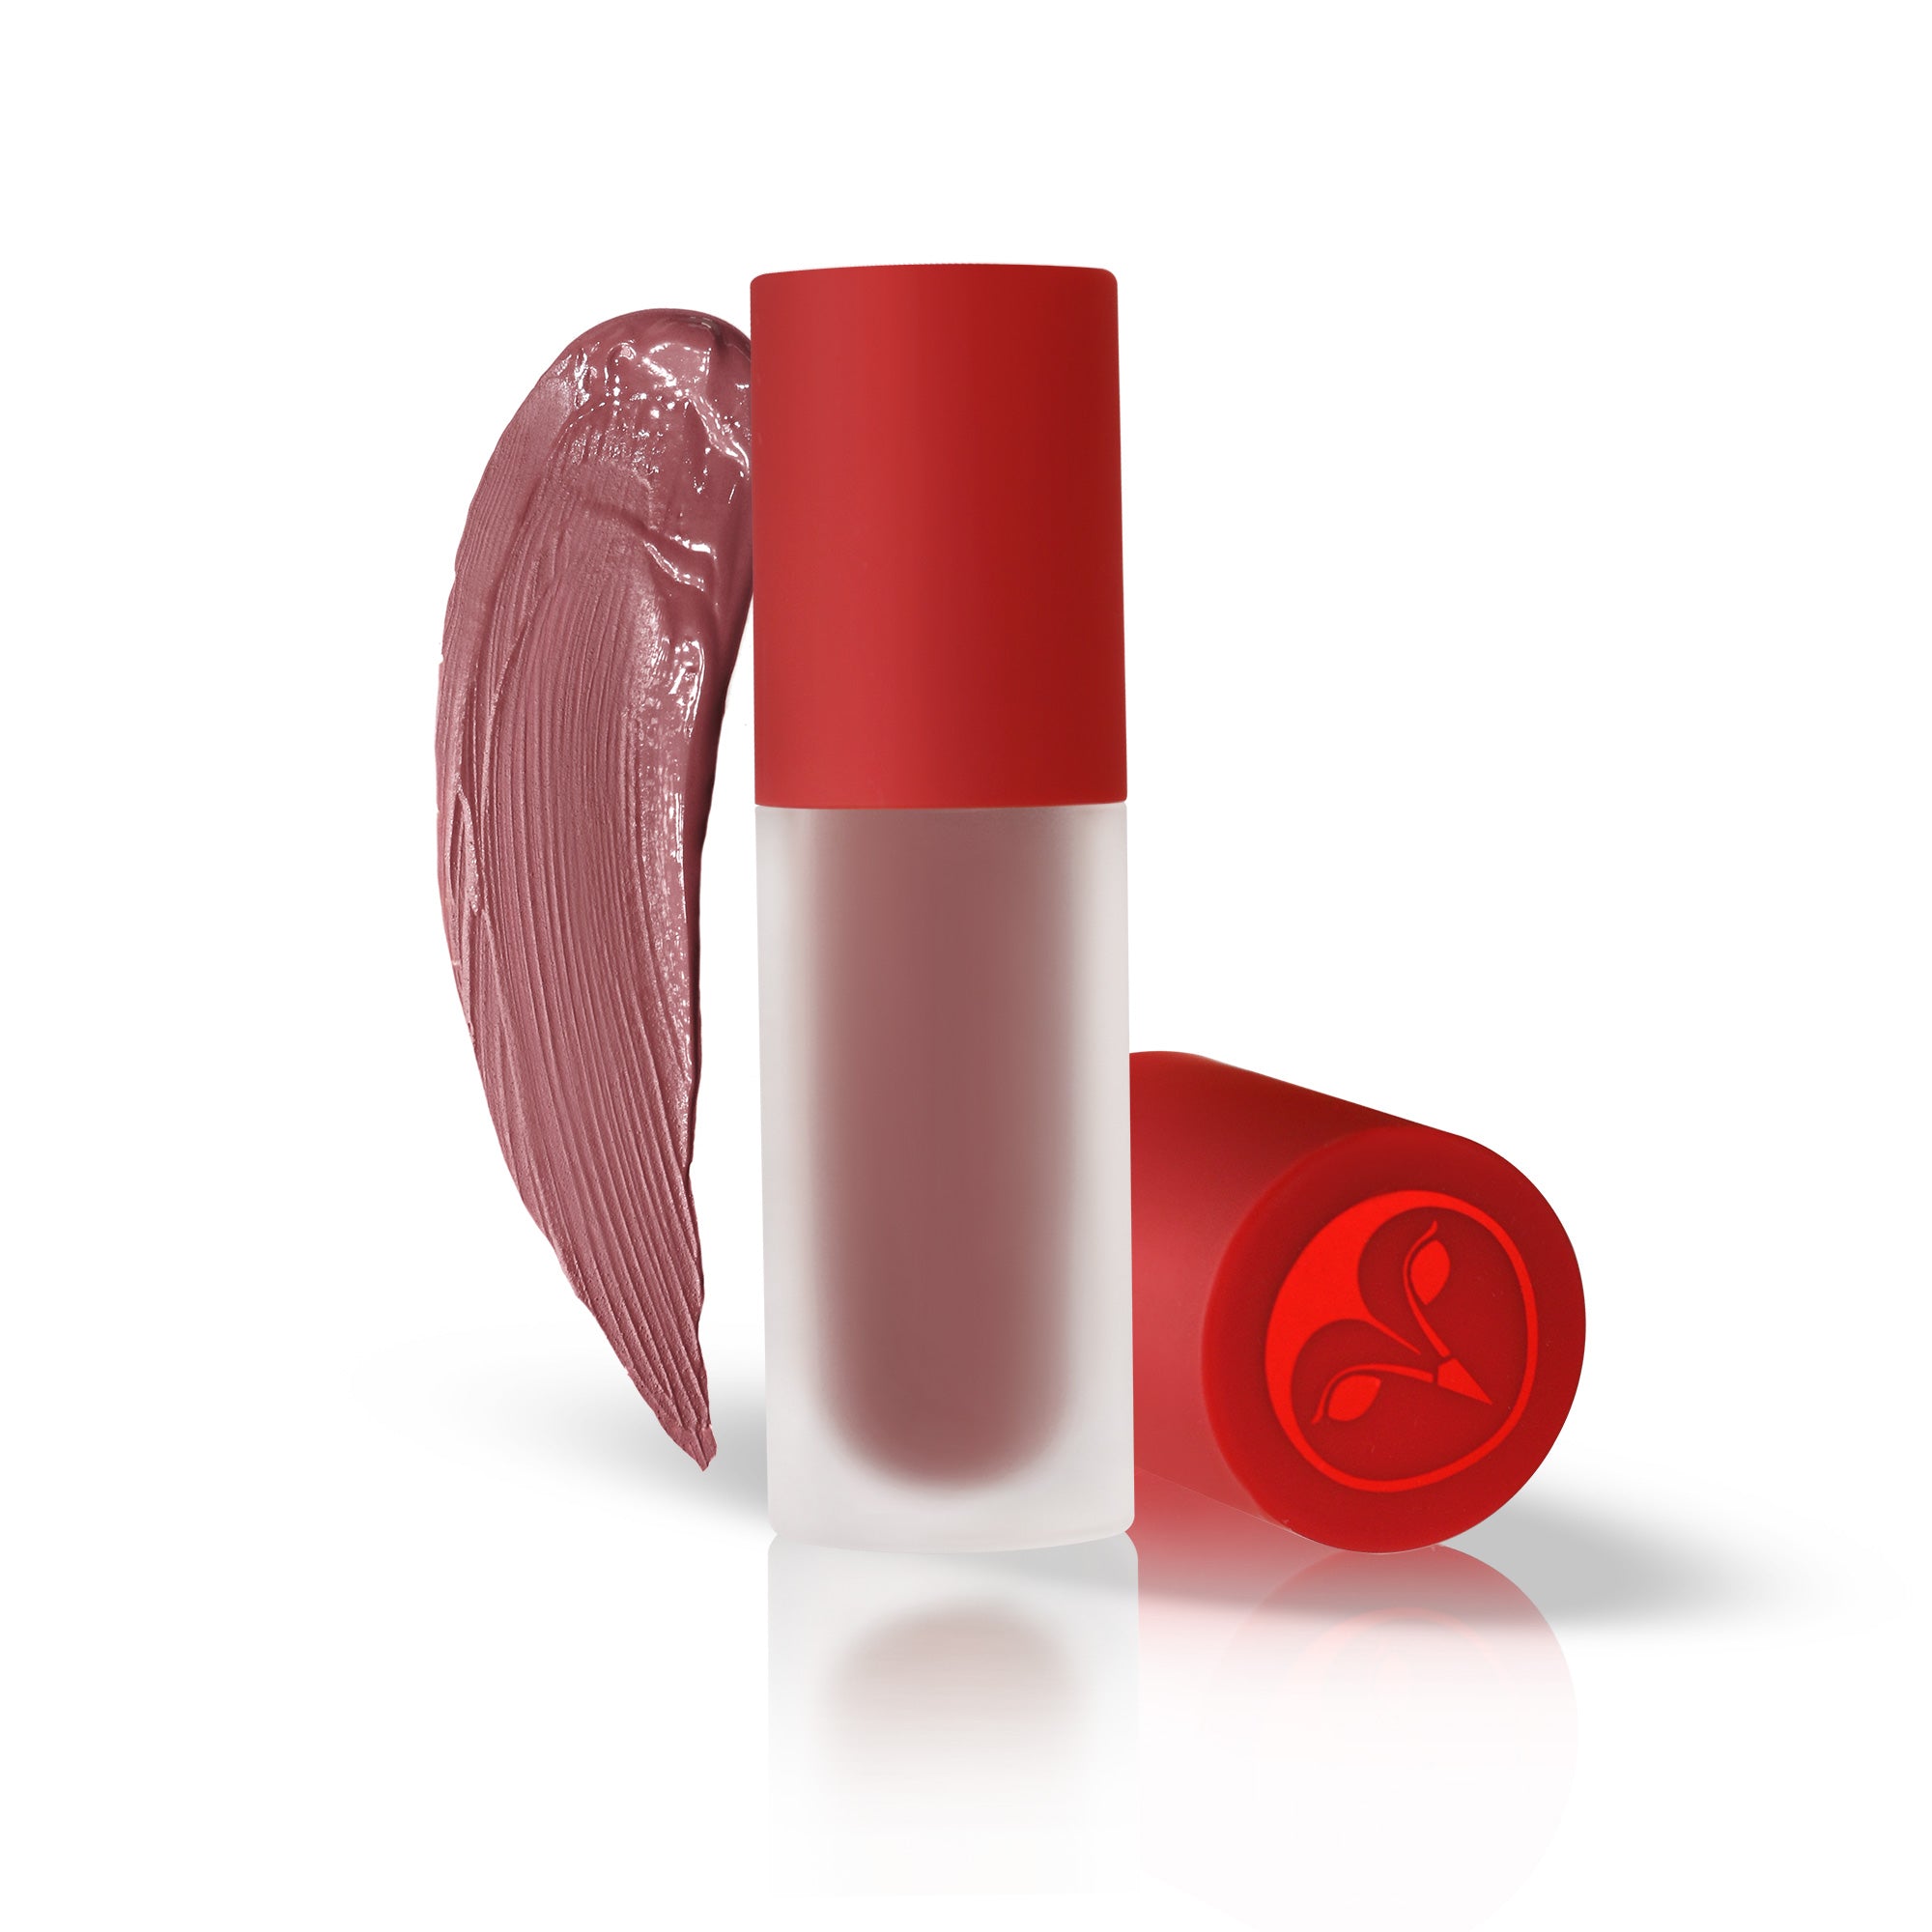 Rustee Road | Transfer-Proof Mousse Lipstick